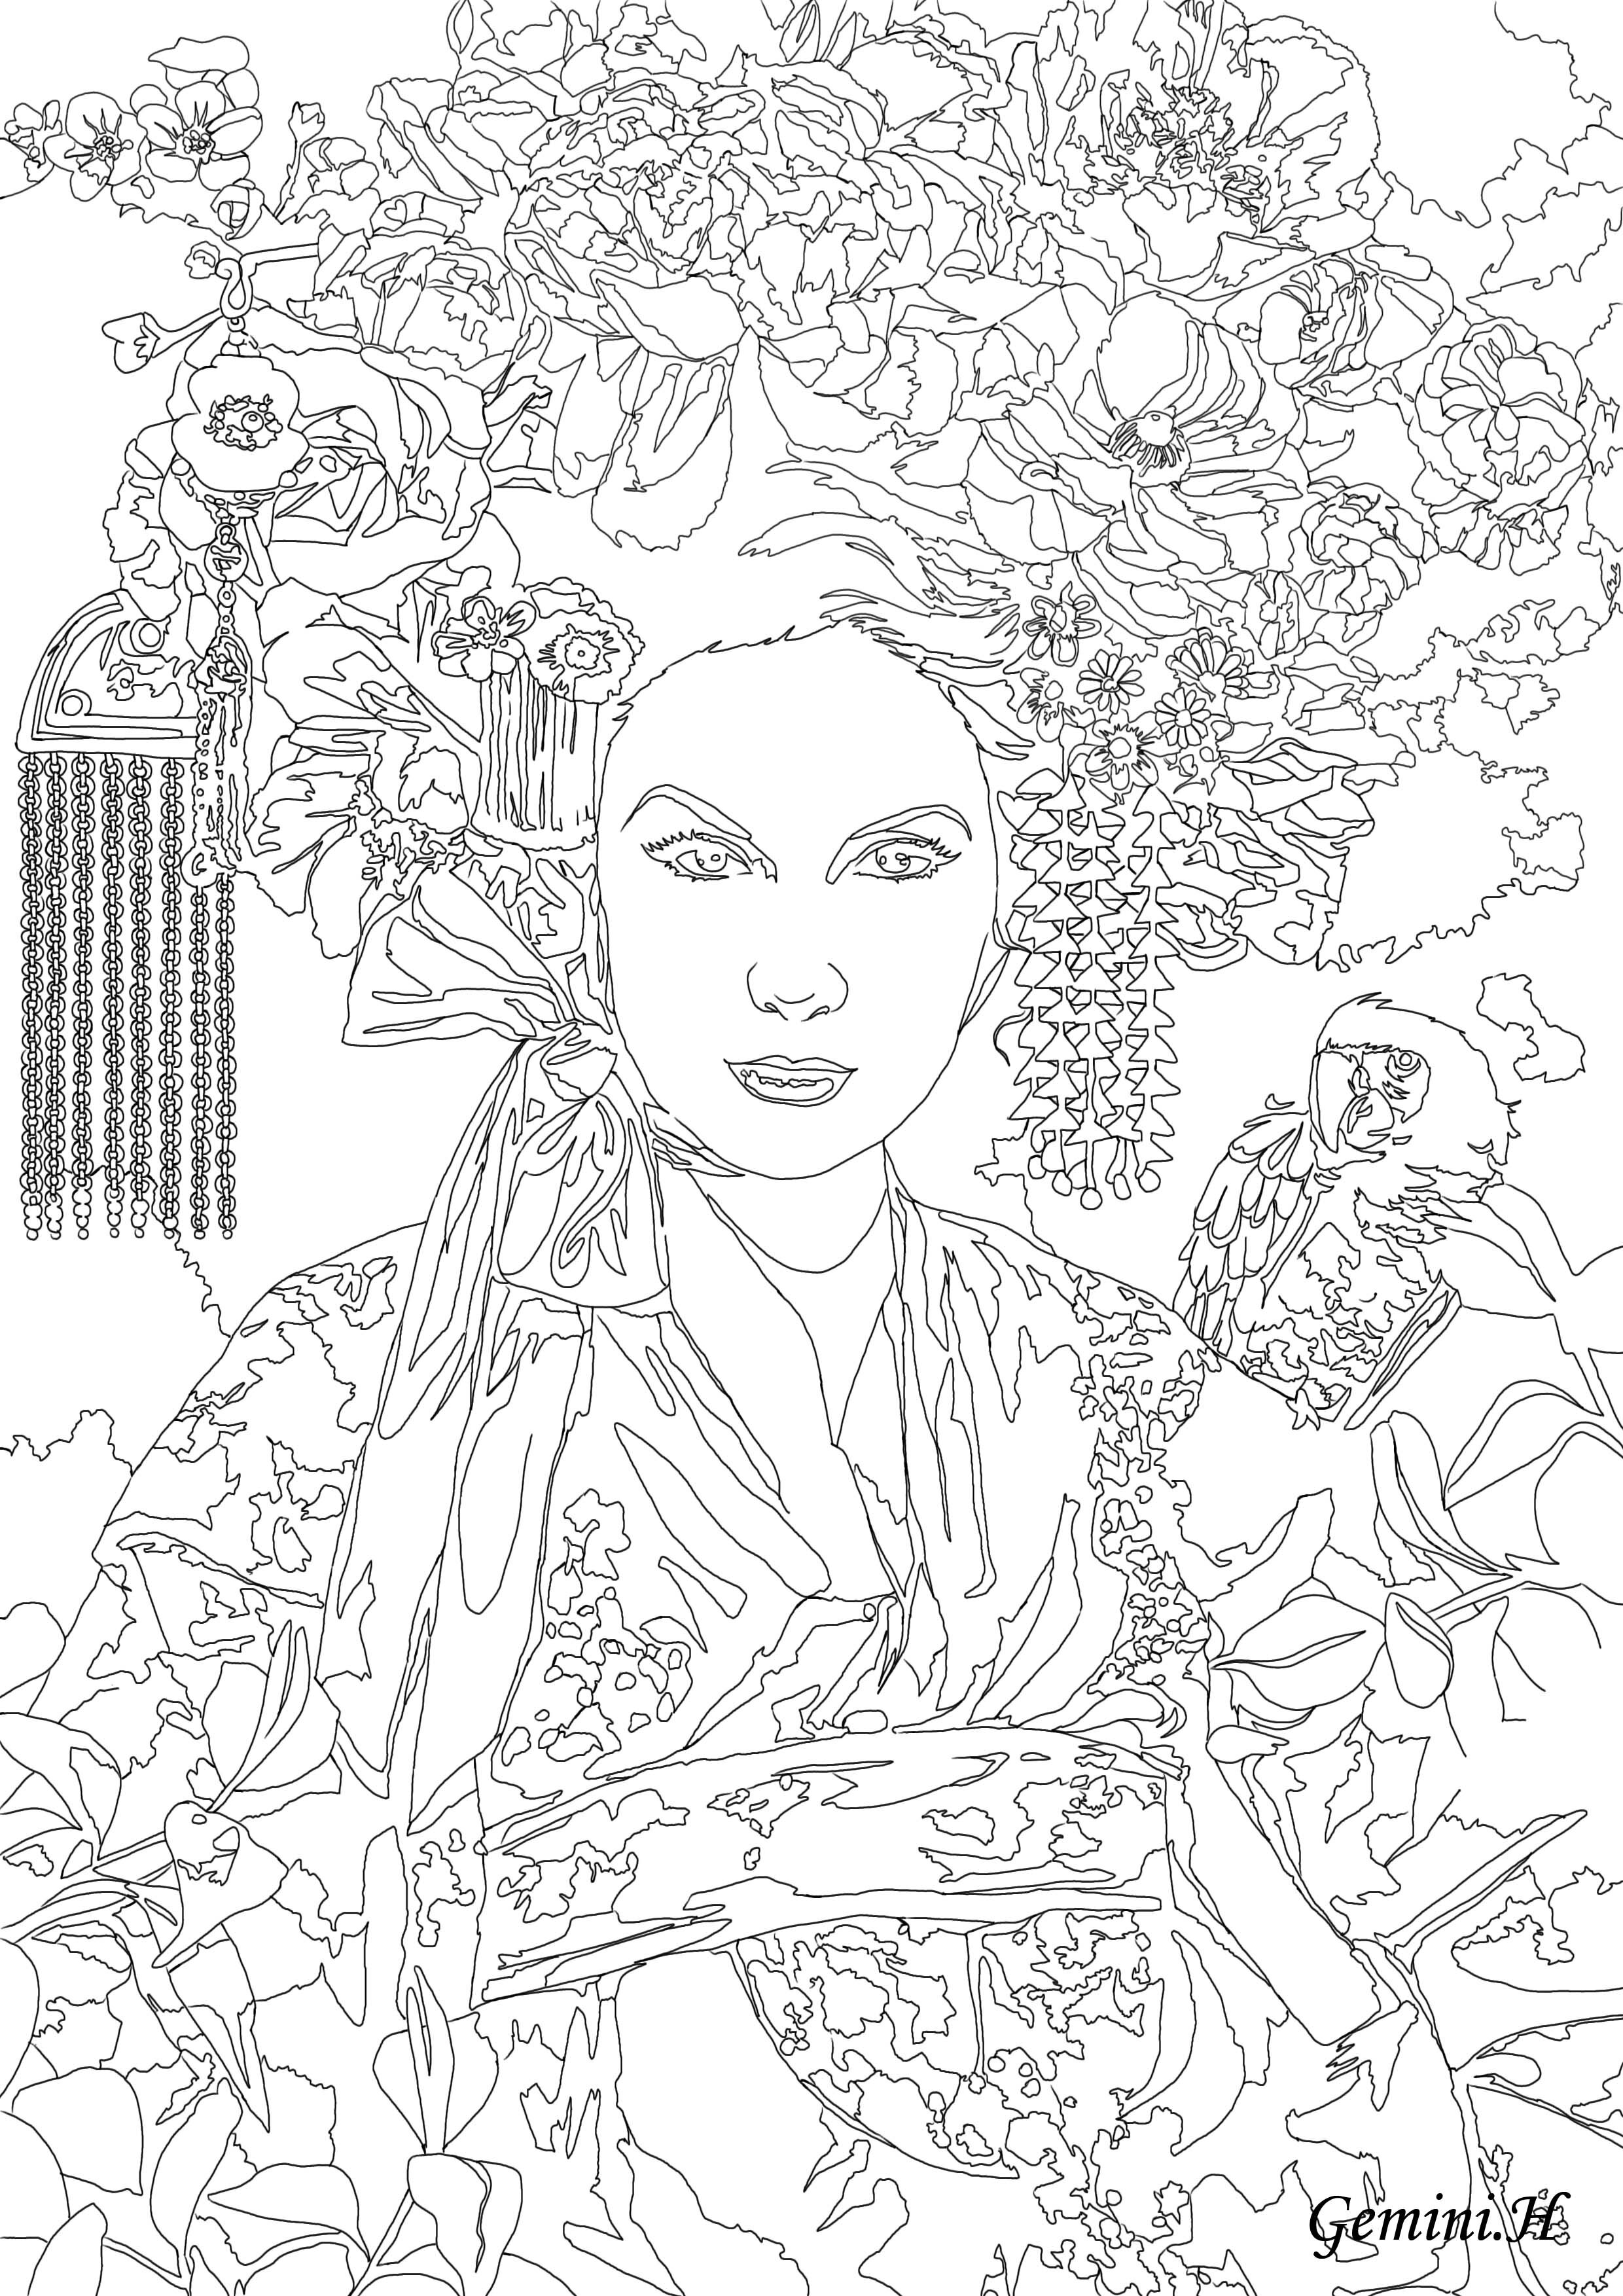 Free coloring pages â brea gallery